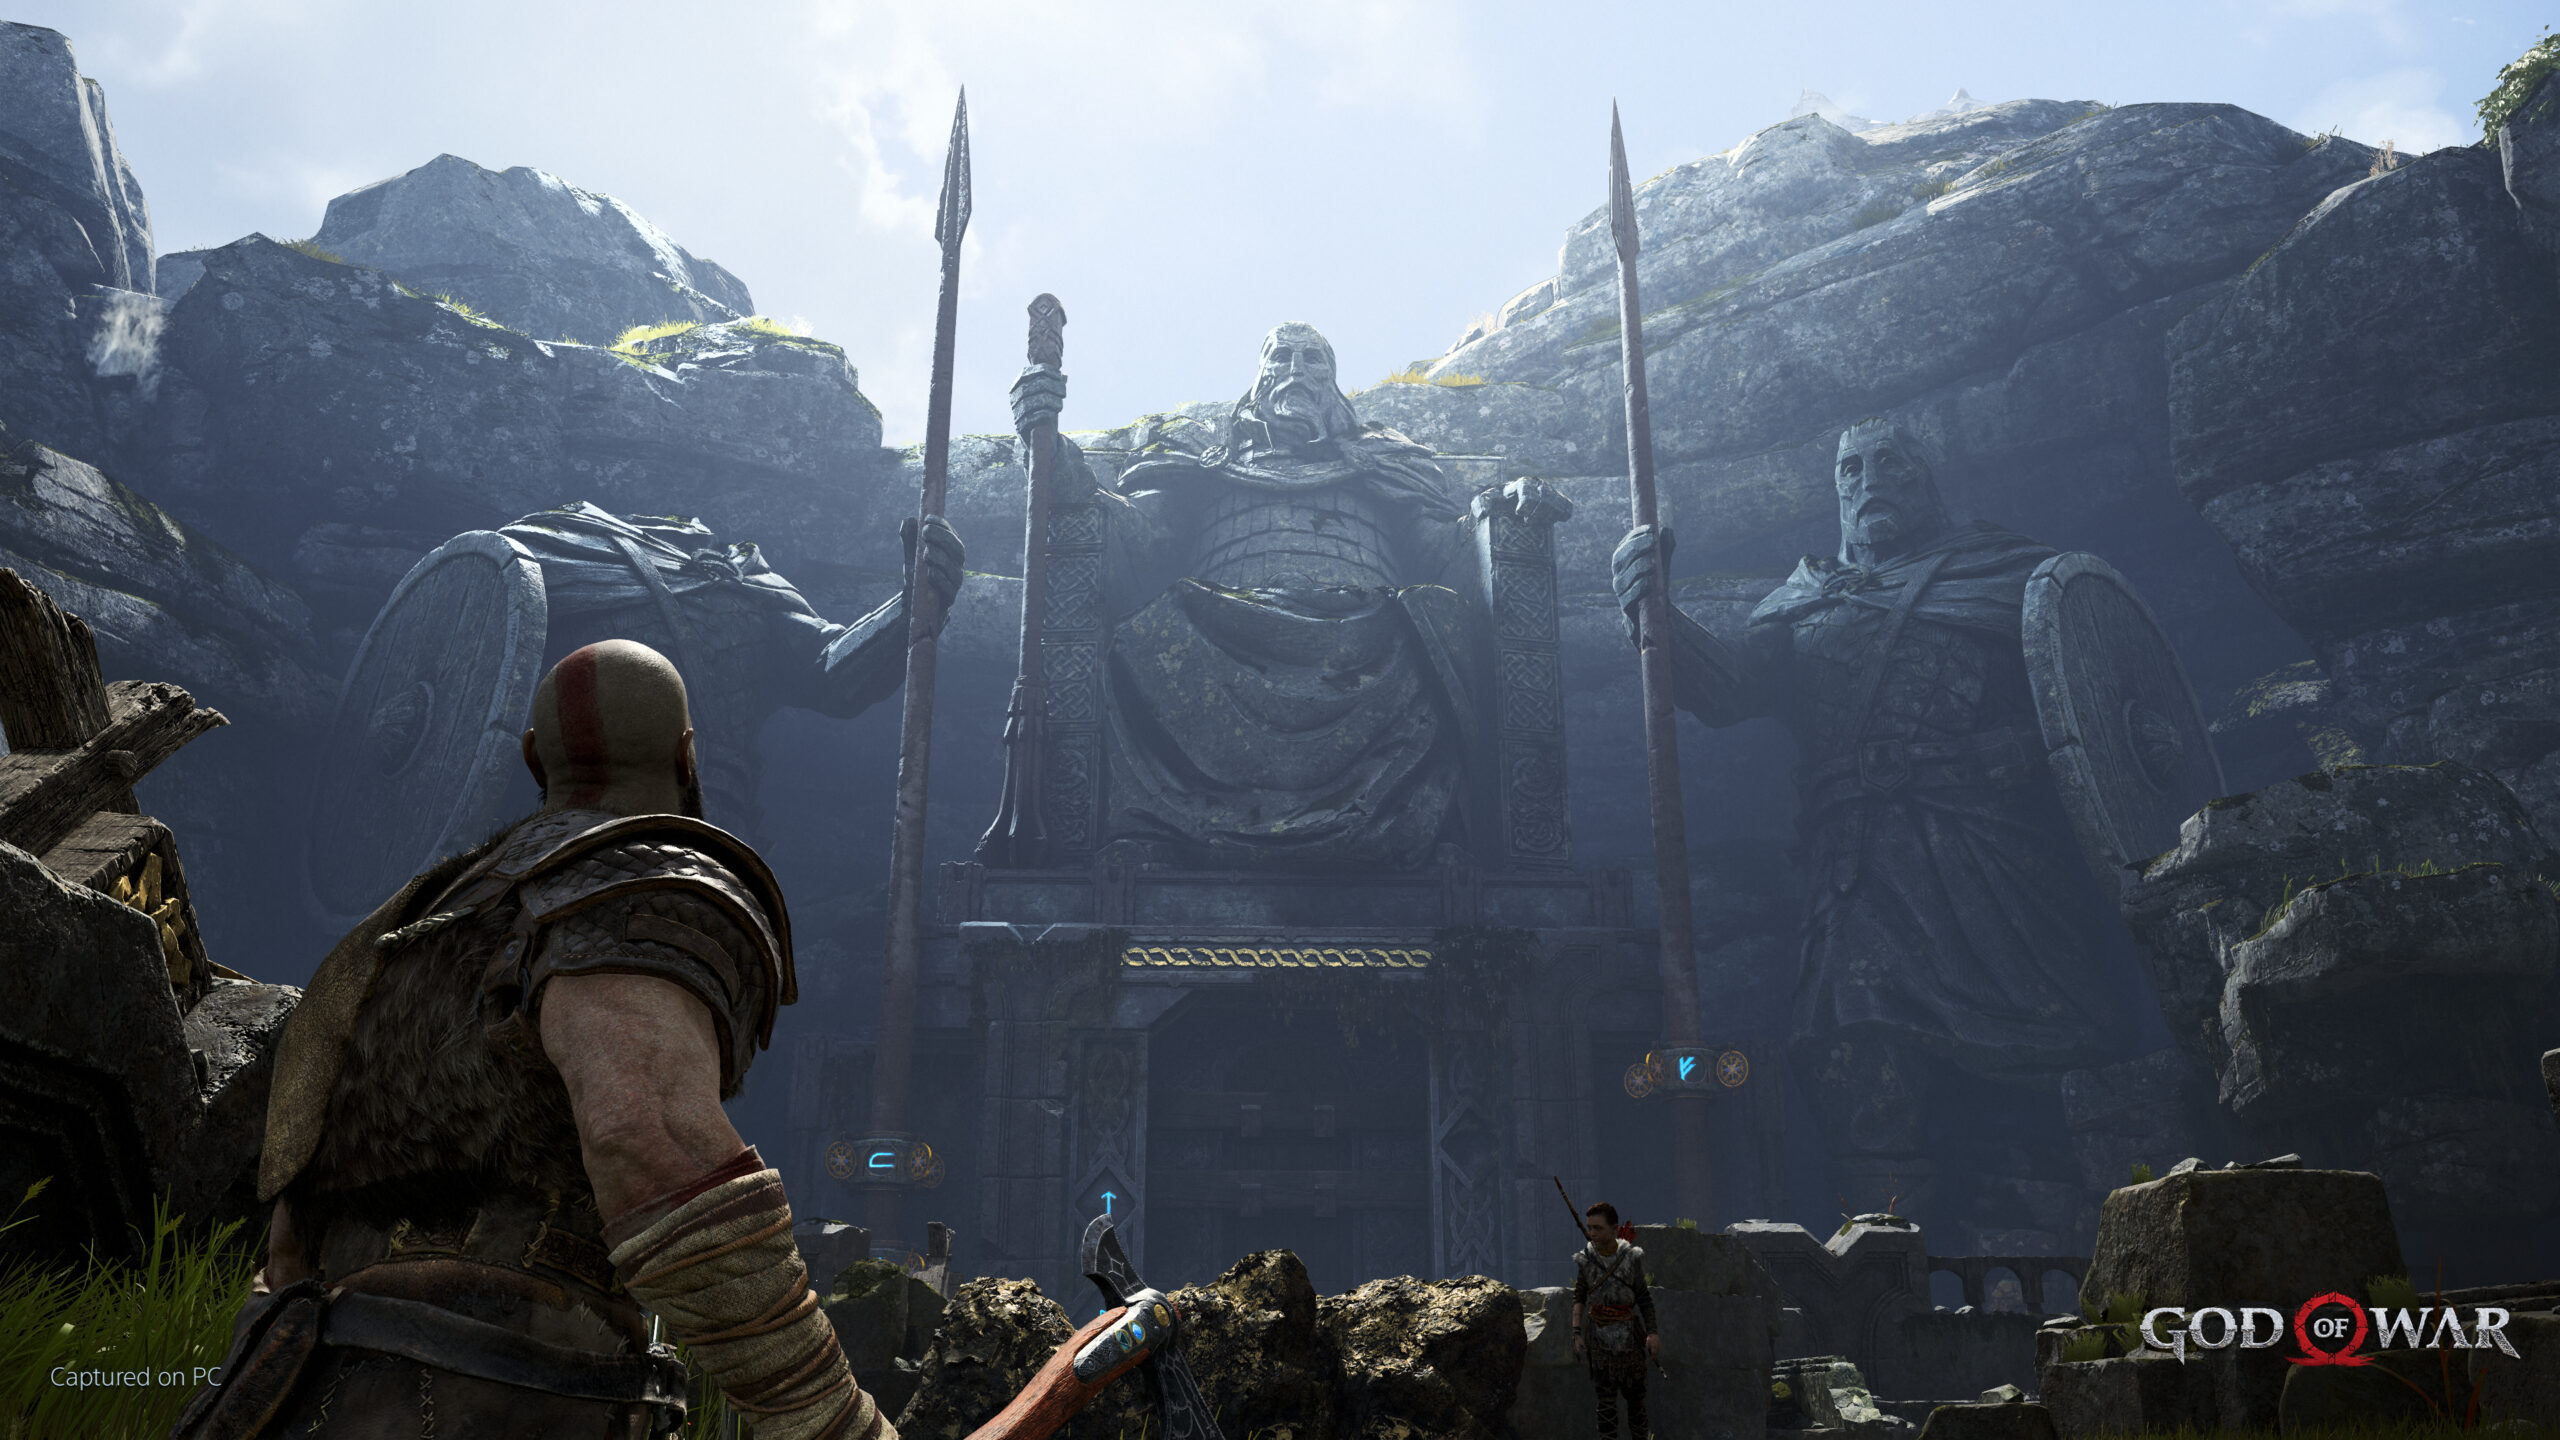 God Of War is coming to PC in January 2022